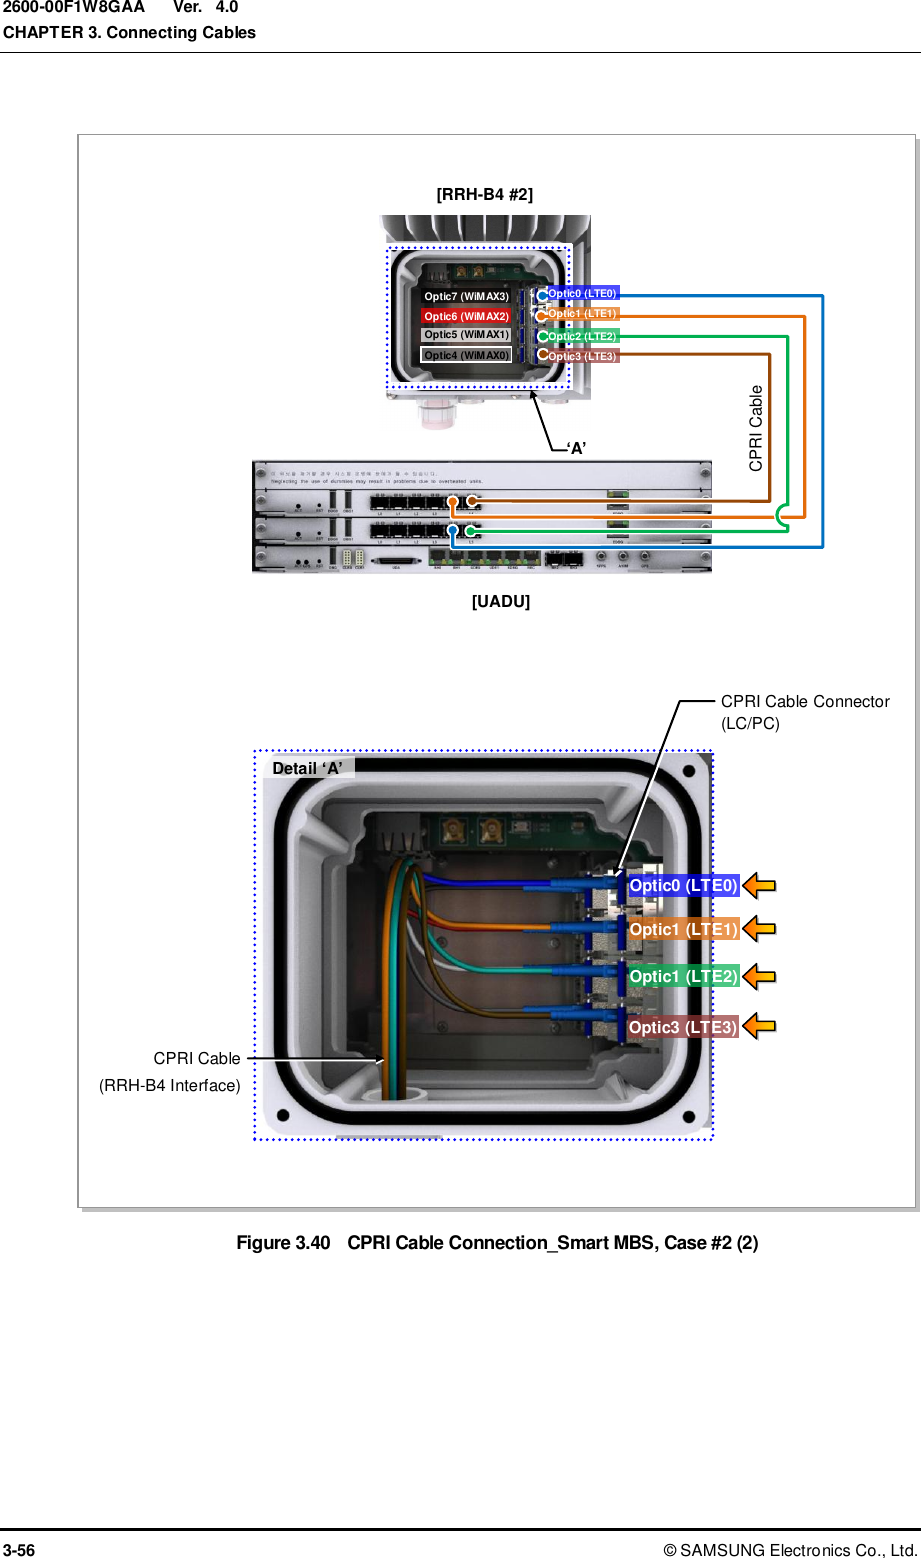  Ver.  CHAPTER 3. Connecting Cables 3-56 ©  SAMSUNG Electronics Co., Ltd. 2600-00F1W8GAA 4.0  Figure 3.40  CPRI Cable Connection_Smart MBS, Case #2 (2)  Optic4 (WiMAX0) Optic6 (WiMAX2) Optic5 (WiMAX1) Optic7 (WiMAX3) ‘A’ [RRH-B4 #2] Detail ‘A’ CPRI Cable (RRH-B4 Interface) CPRI Cable Connector (LC/PC) Optic0 (LTE0) Optic1 (LTE1) CPRI Cable [UADU] Optic3 (LTE3) Optic1 (LTE2) Optic0 (LTE0) Optic1 (LTE1) Optic2 (LTE2) Optic3 (LTE3) 